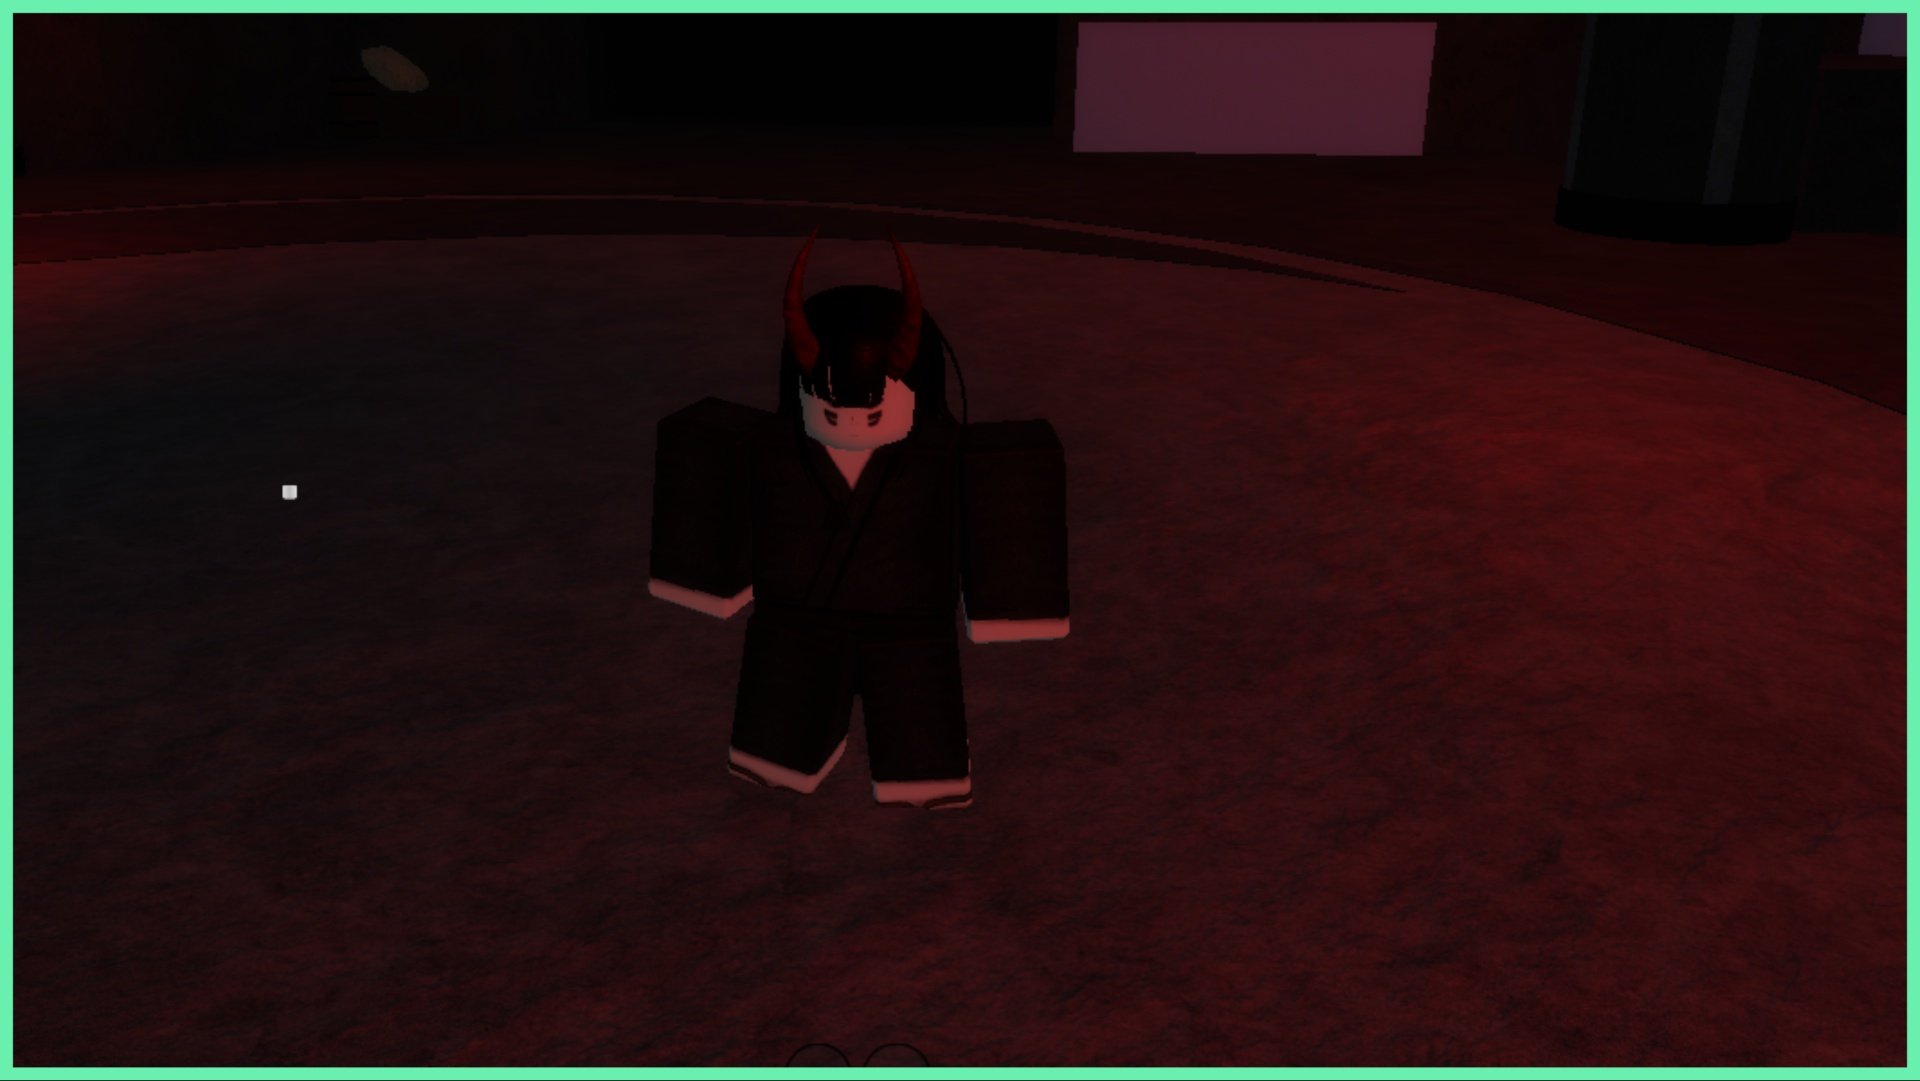 the image shows my avatar with large demons horns inside demon purgatory which is red and grim